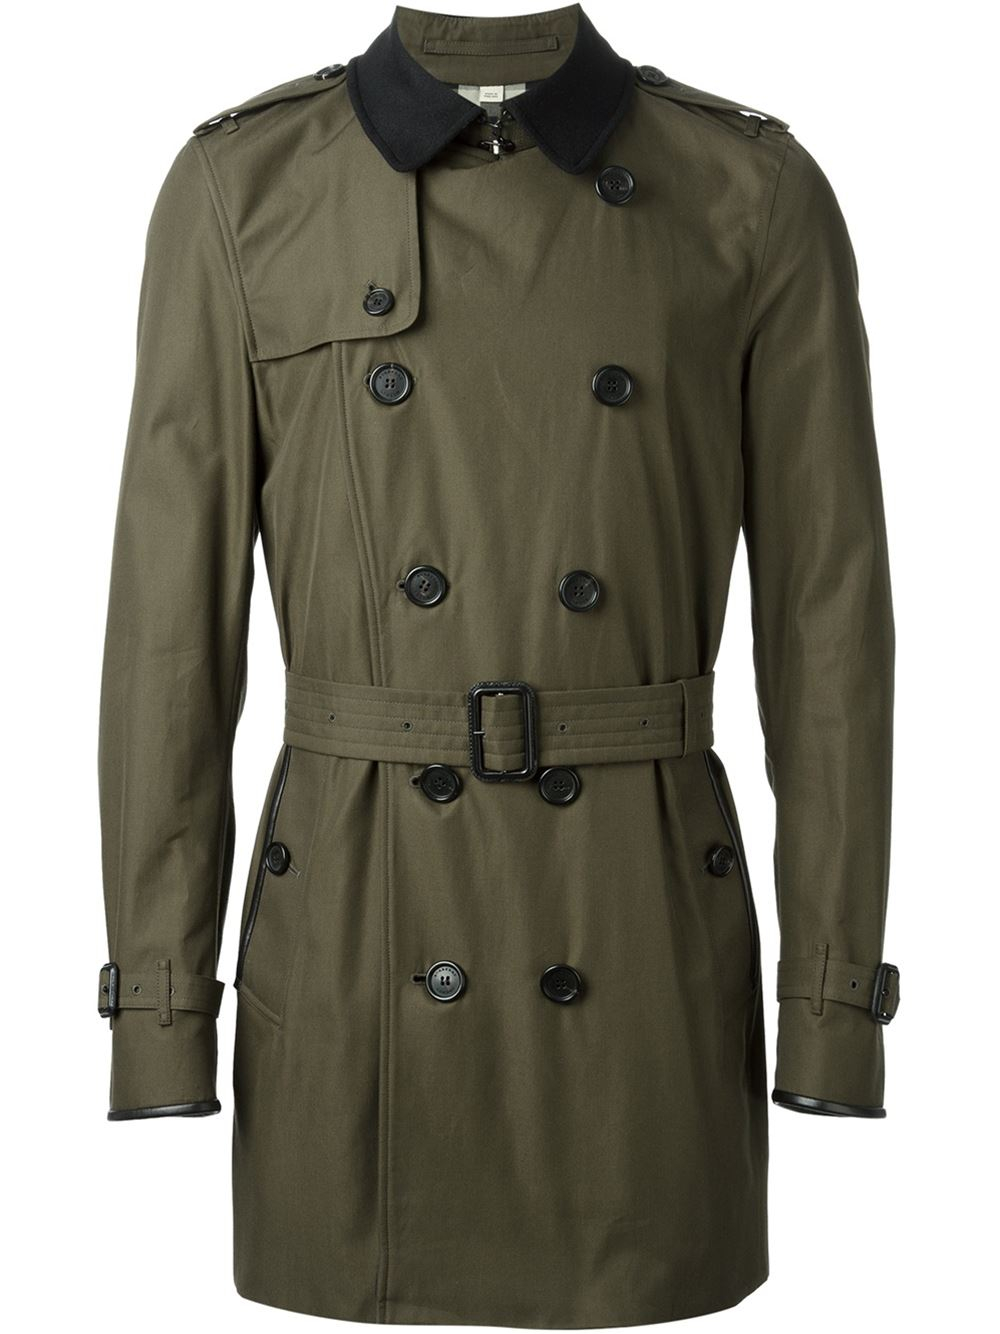 Lyst - Burberry Contrasting Collar Trench Coat in Green for Men